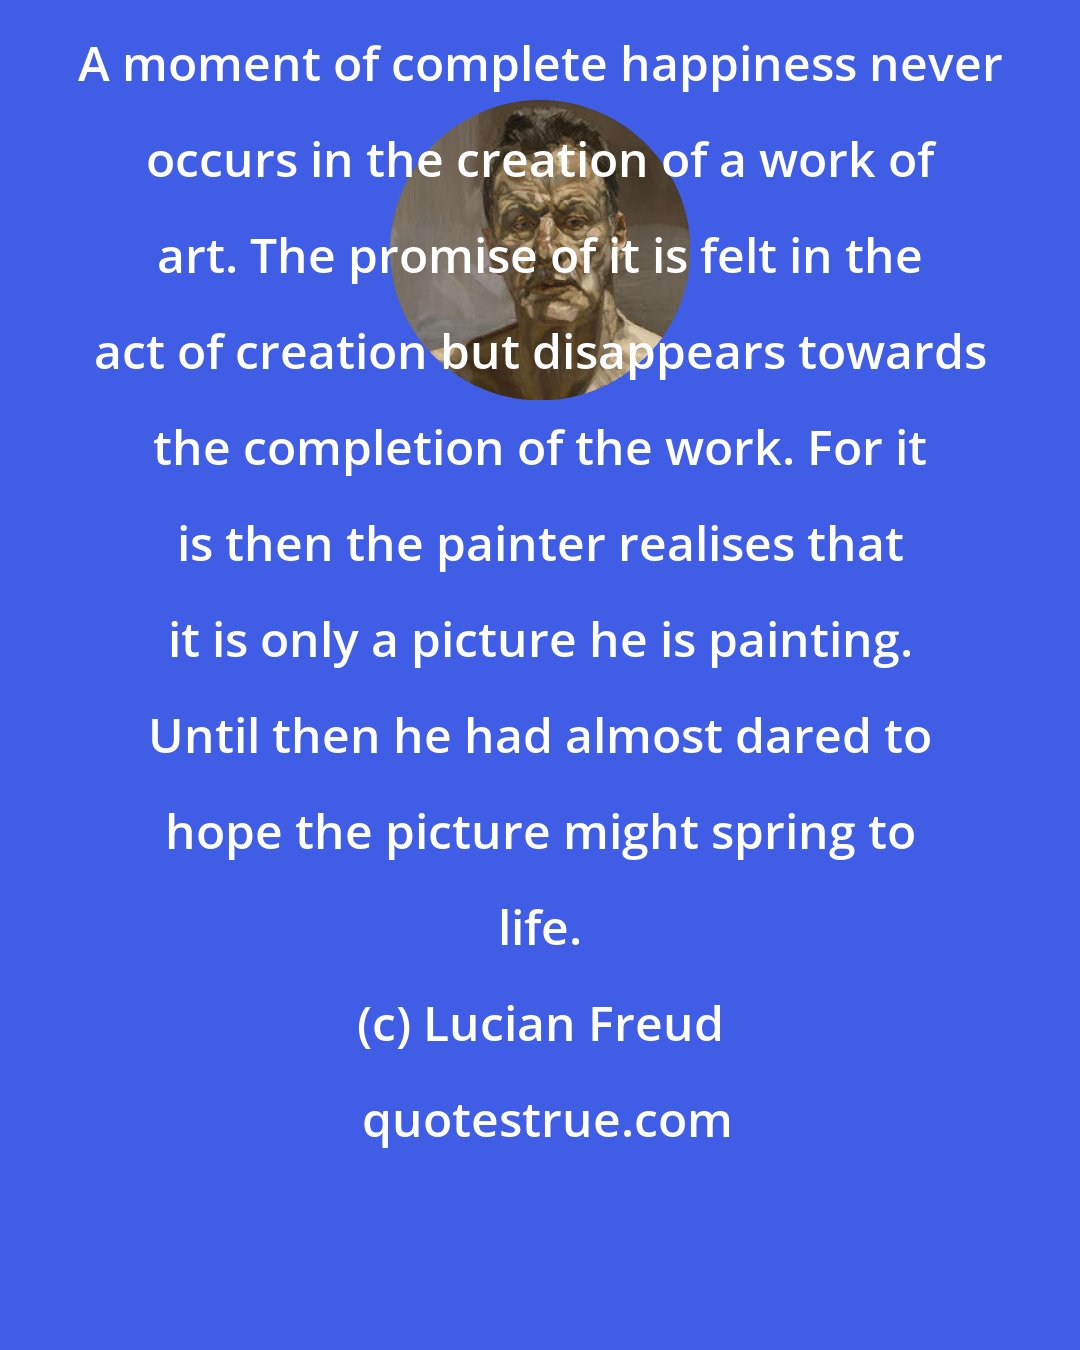 Lucian Freud: A moment of complete happiness never occurs in the creation of a work of art. The promise of it is felt in the act of creation but disappears towards the completion of the work. For it is then the painter realises that it is only a picture he is painting. Until then he had almost dared to hope the picture might spring to life.